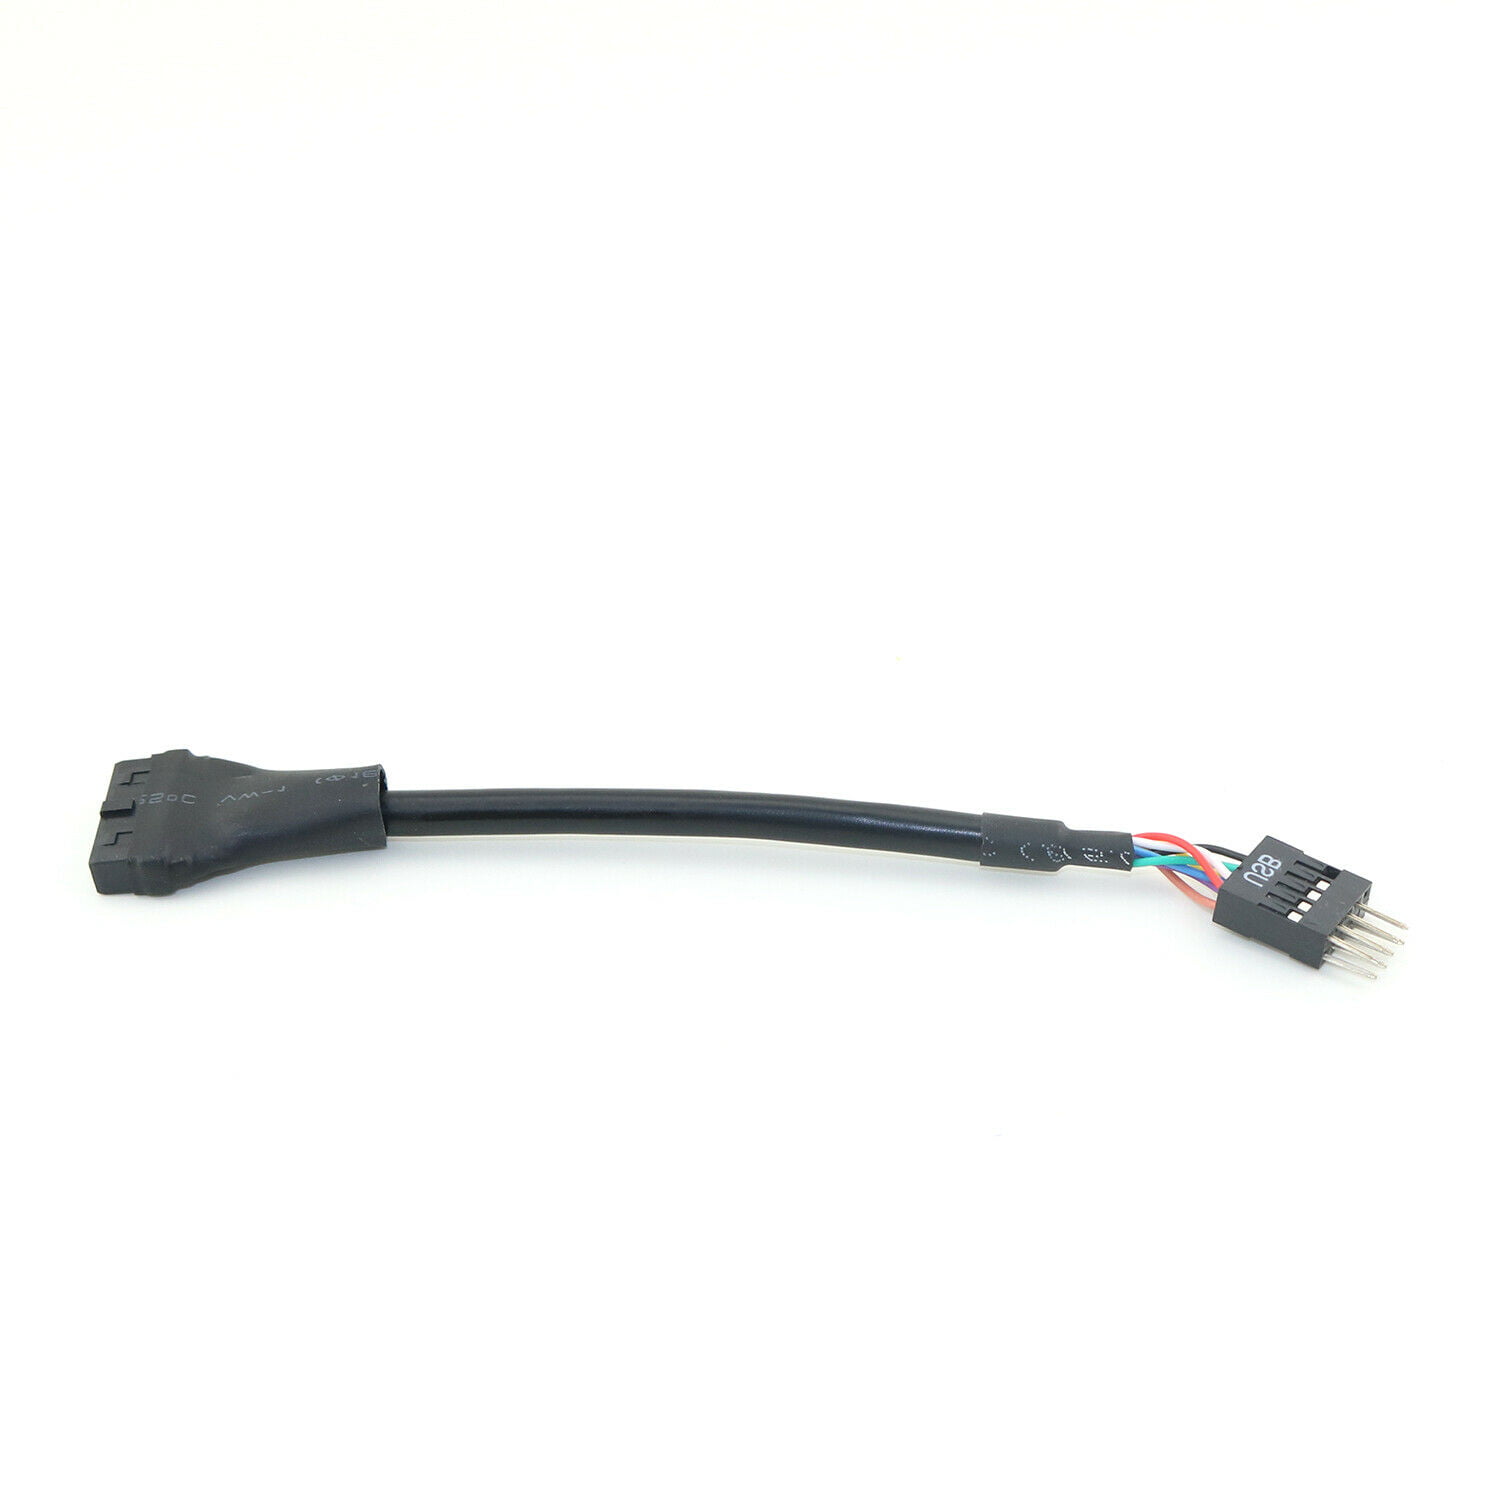 20 Pin Header Male USB 3.0 to 9 Pin Female USB 2.0 Conversion Cable Adapter Wire 